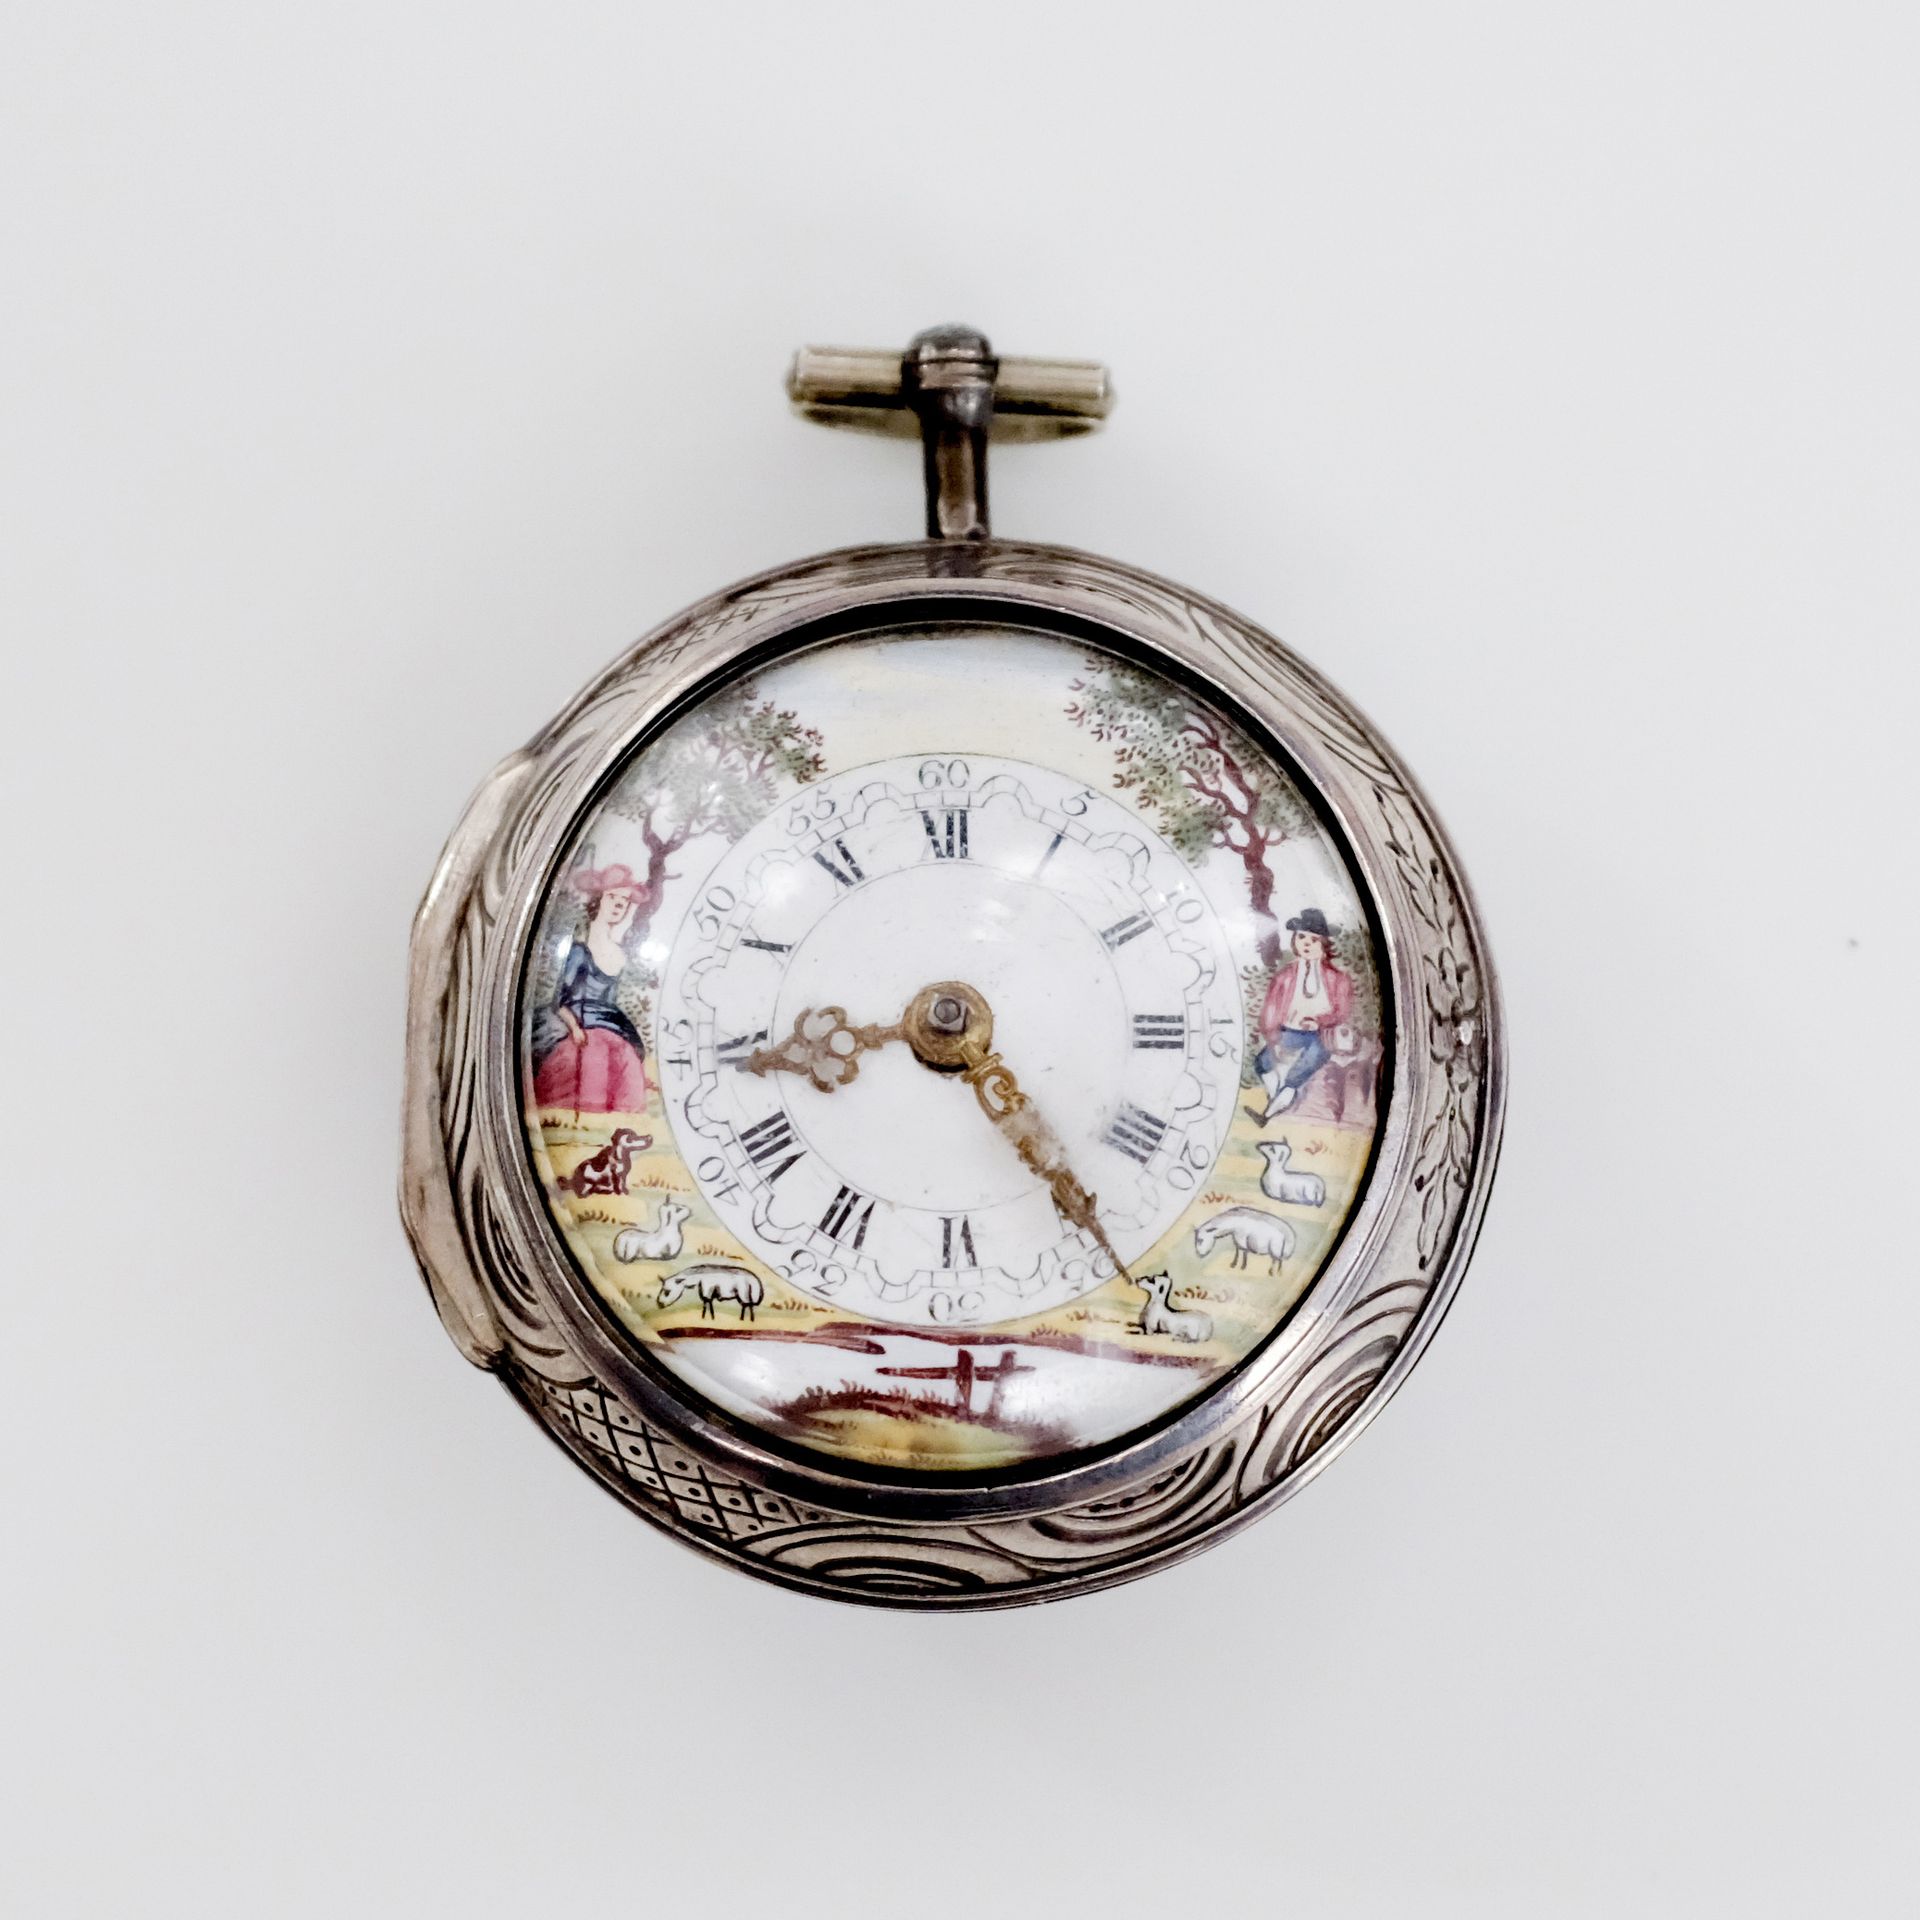 STEPH CUNDEE À LONDRES N° 6466
Silver pocket watch, white enamel dial with ename&hellip;